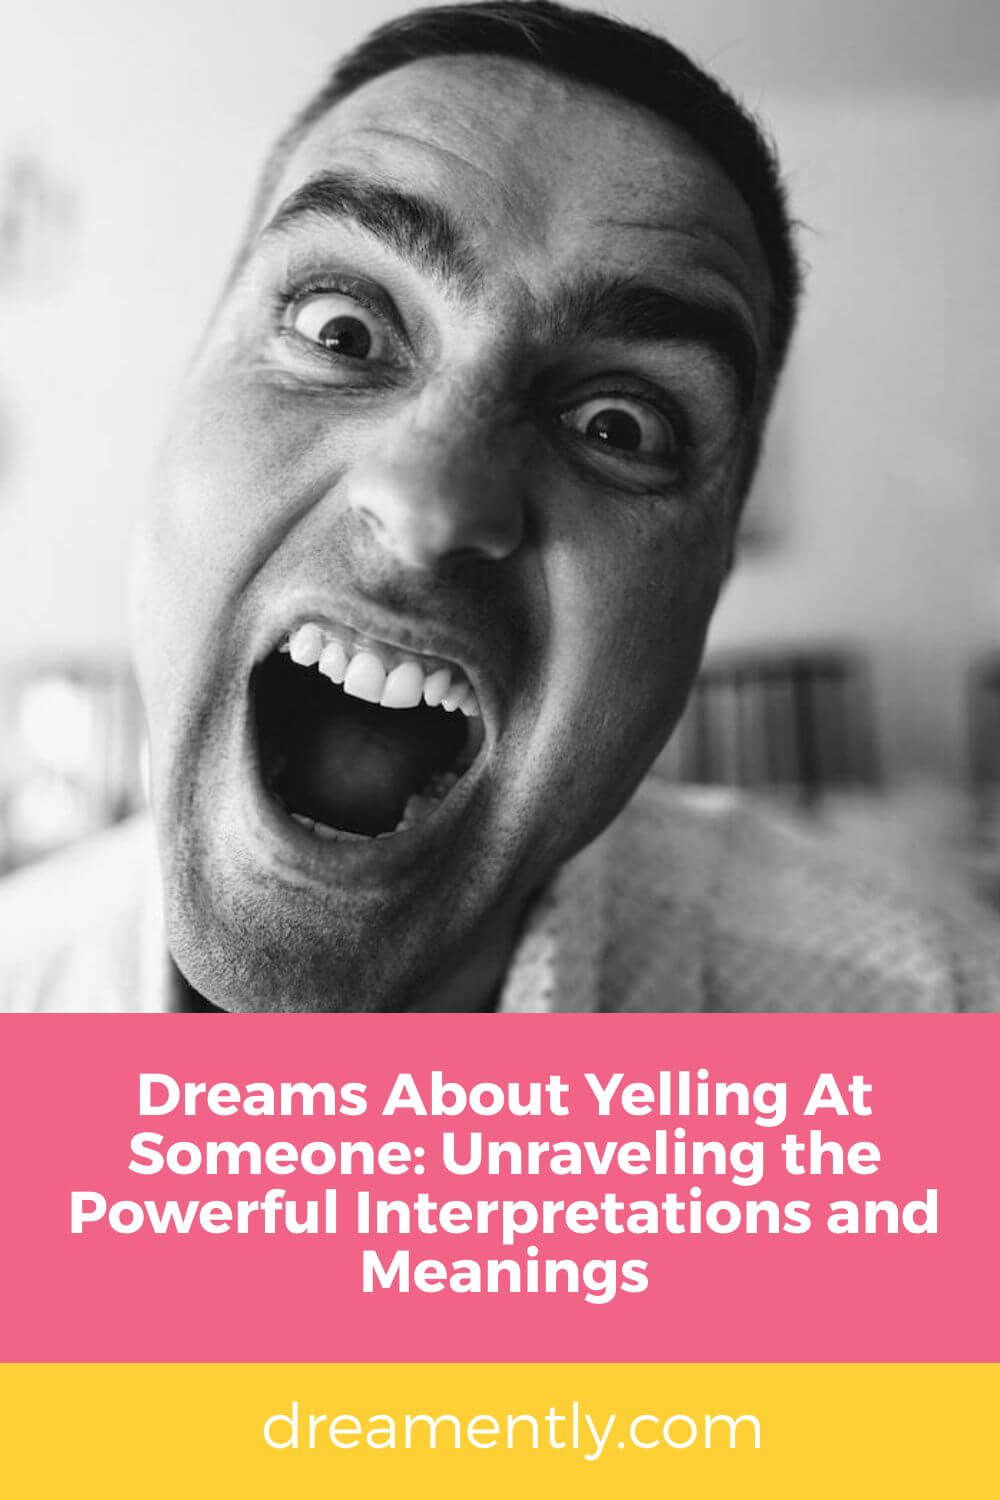 Dreams About Yelling At Someone- Unraveling the Powerful Interpretations and Meanings (1)